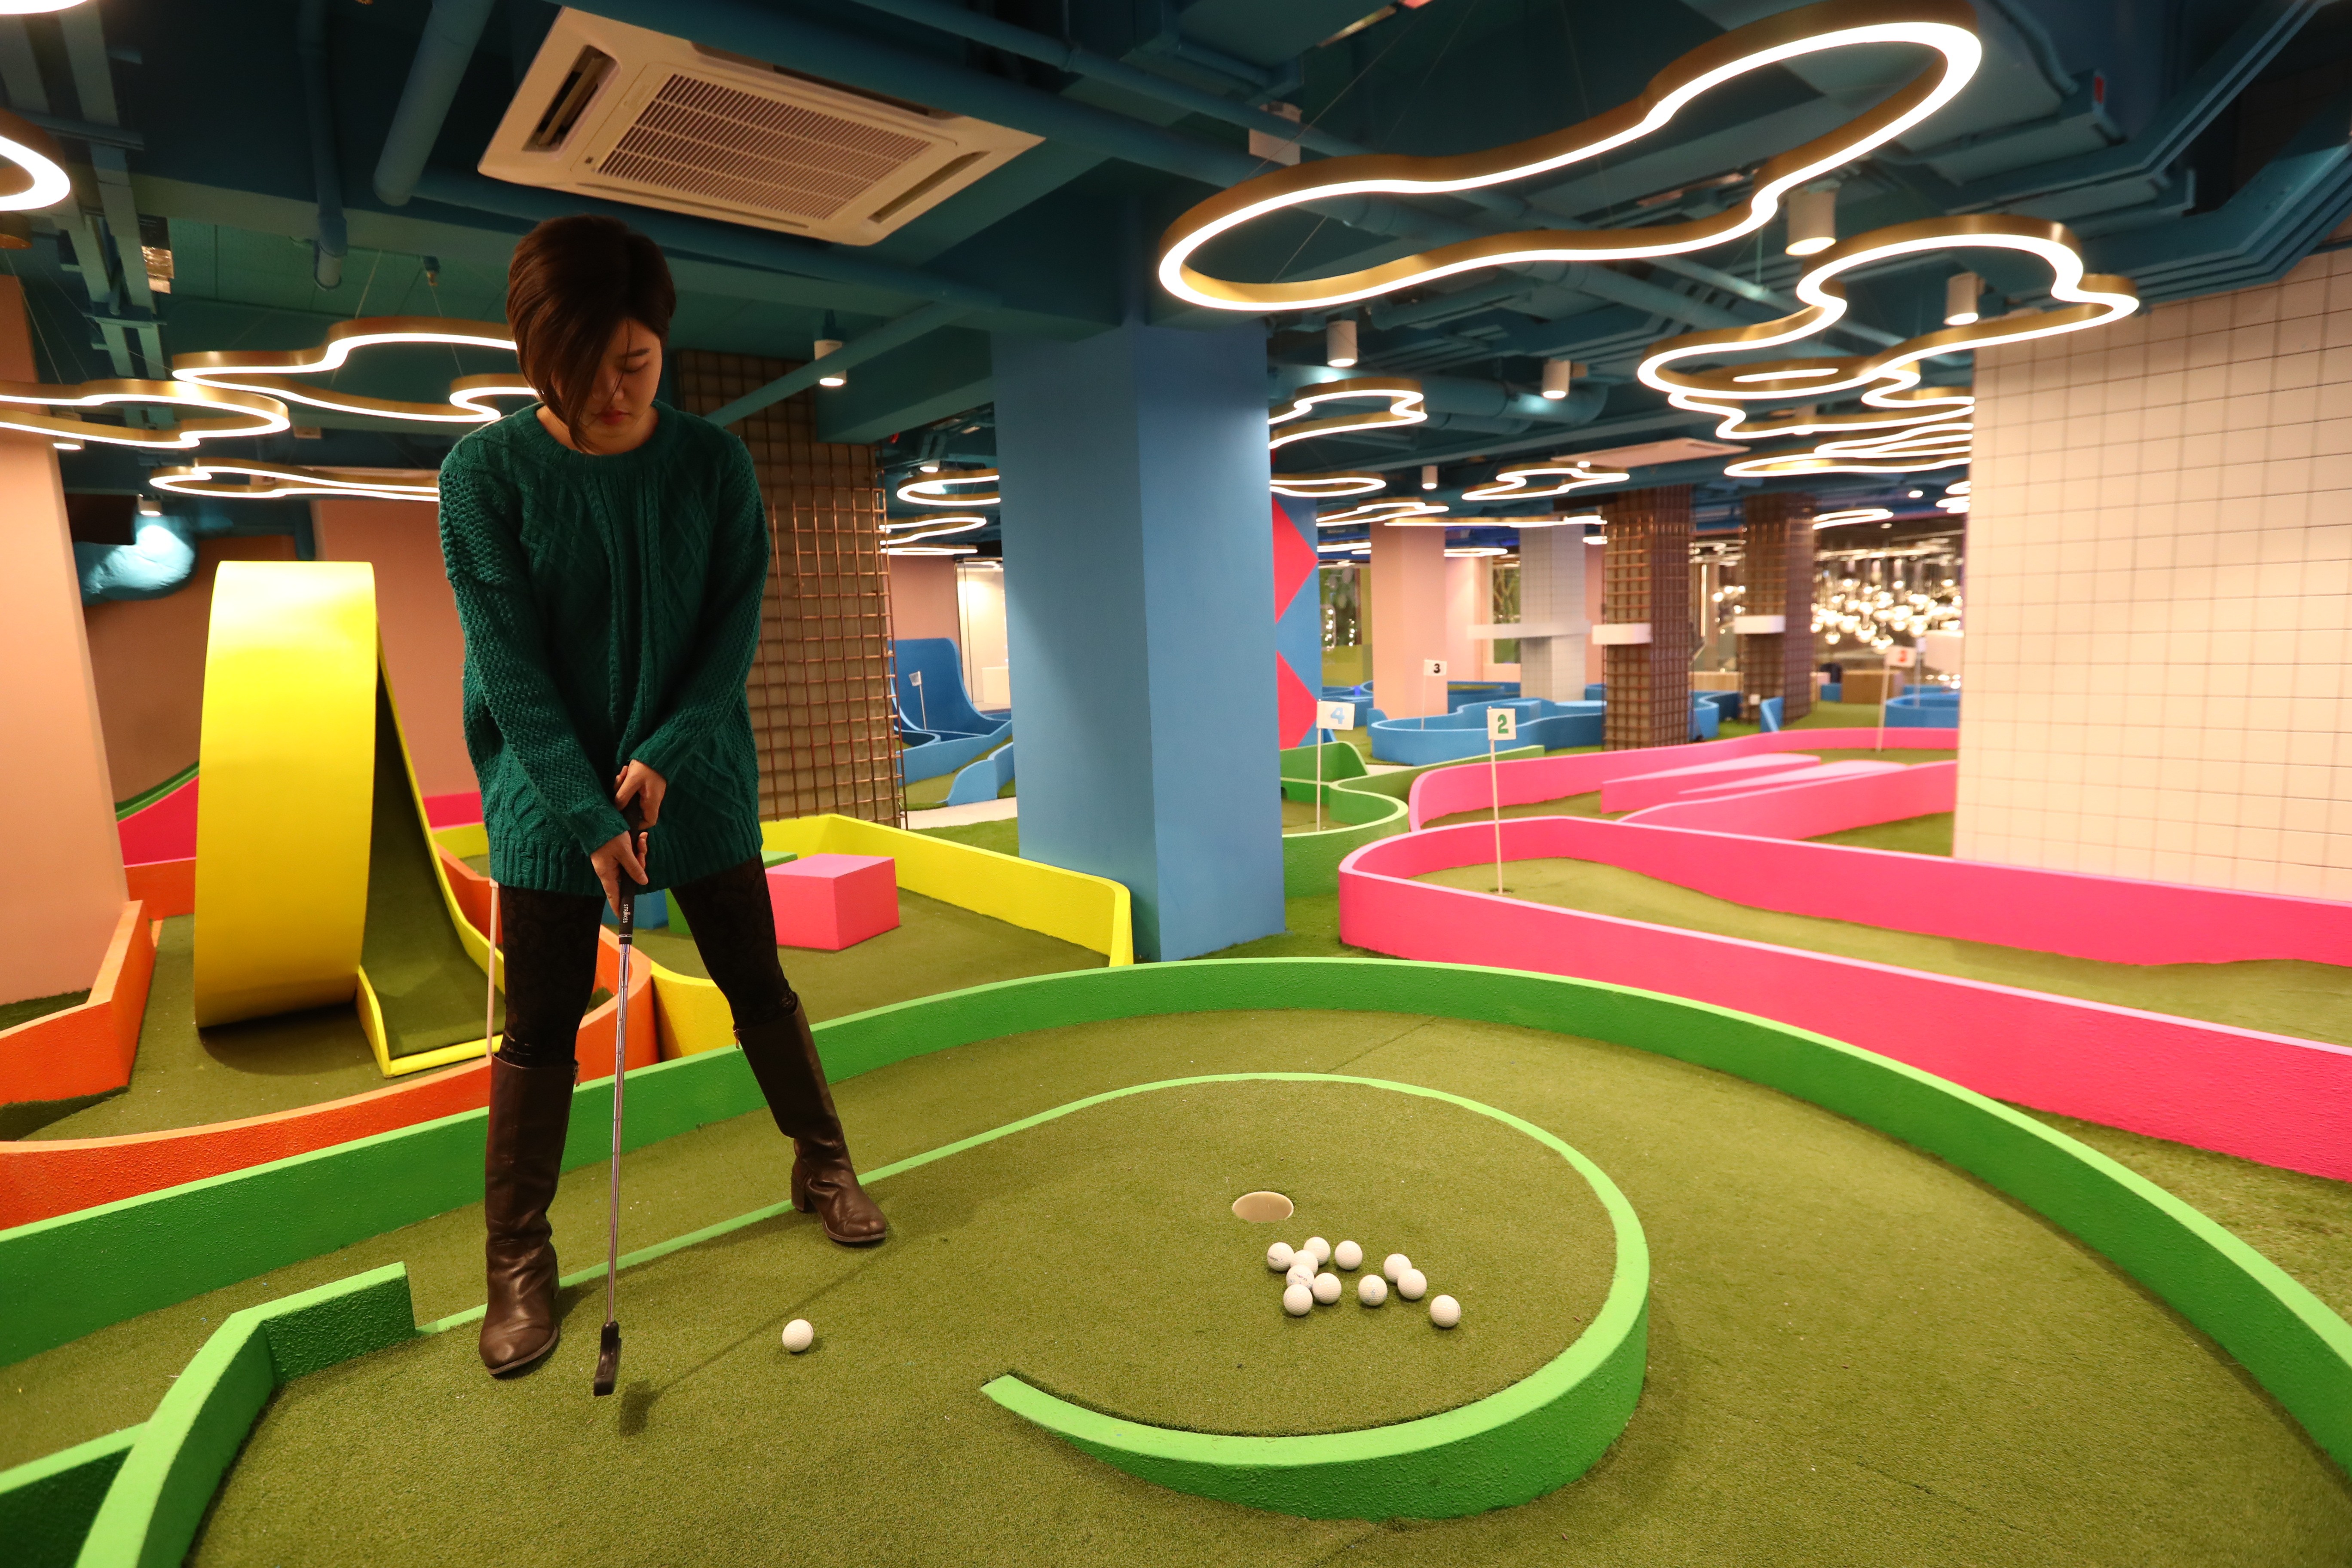 The start-up Strokes has opened Hong Kong’s first mini-golf course inside a restaurant, in Fashion Walk, in Causeway Bay. Photo: Nora Tam